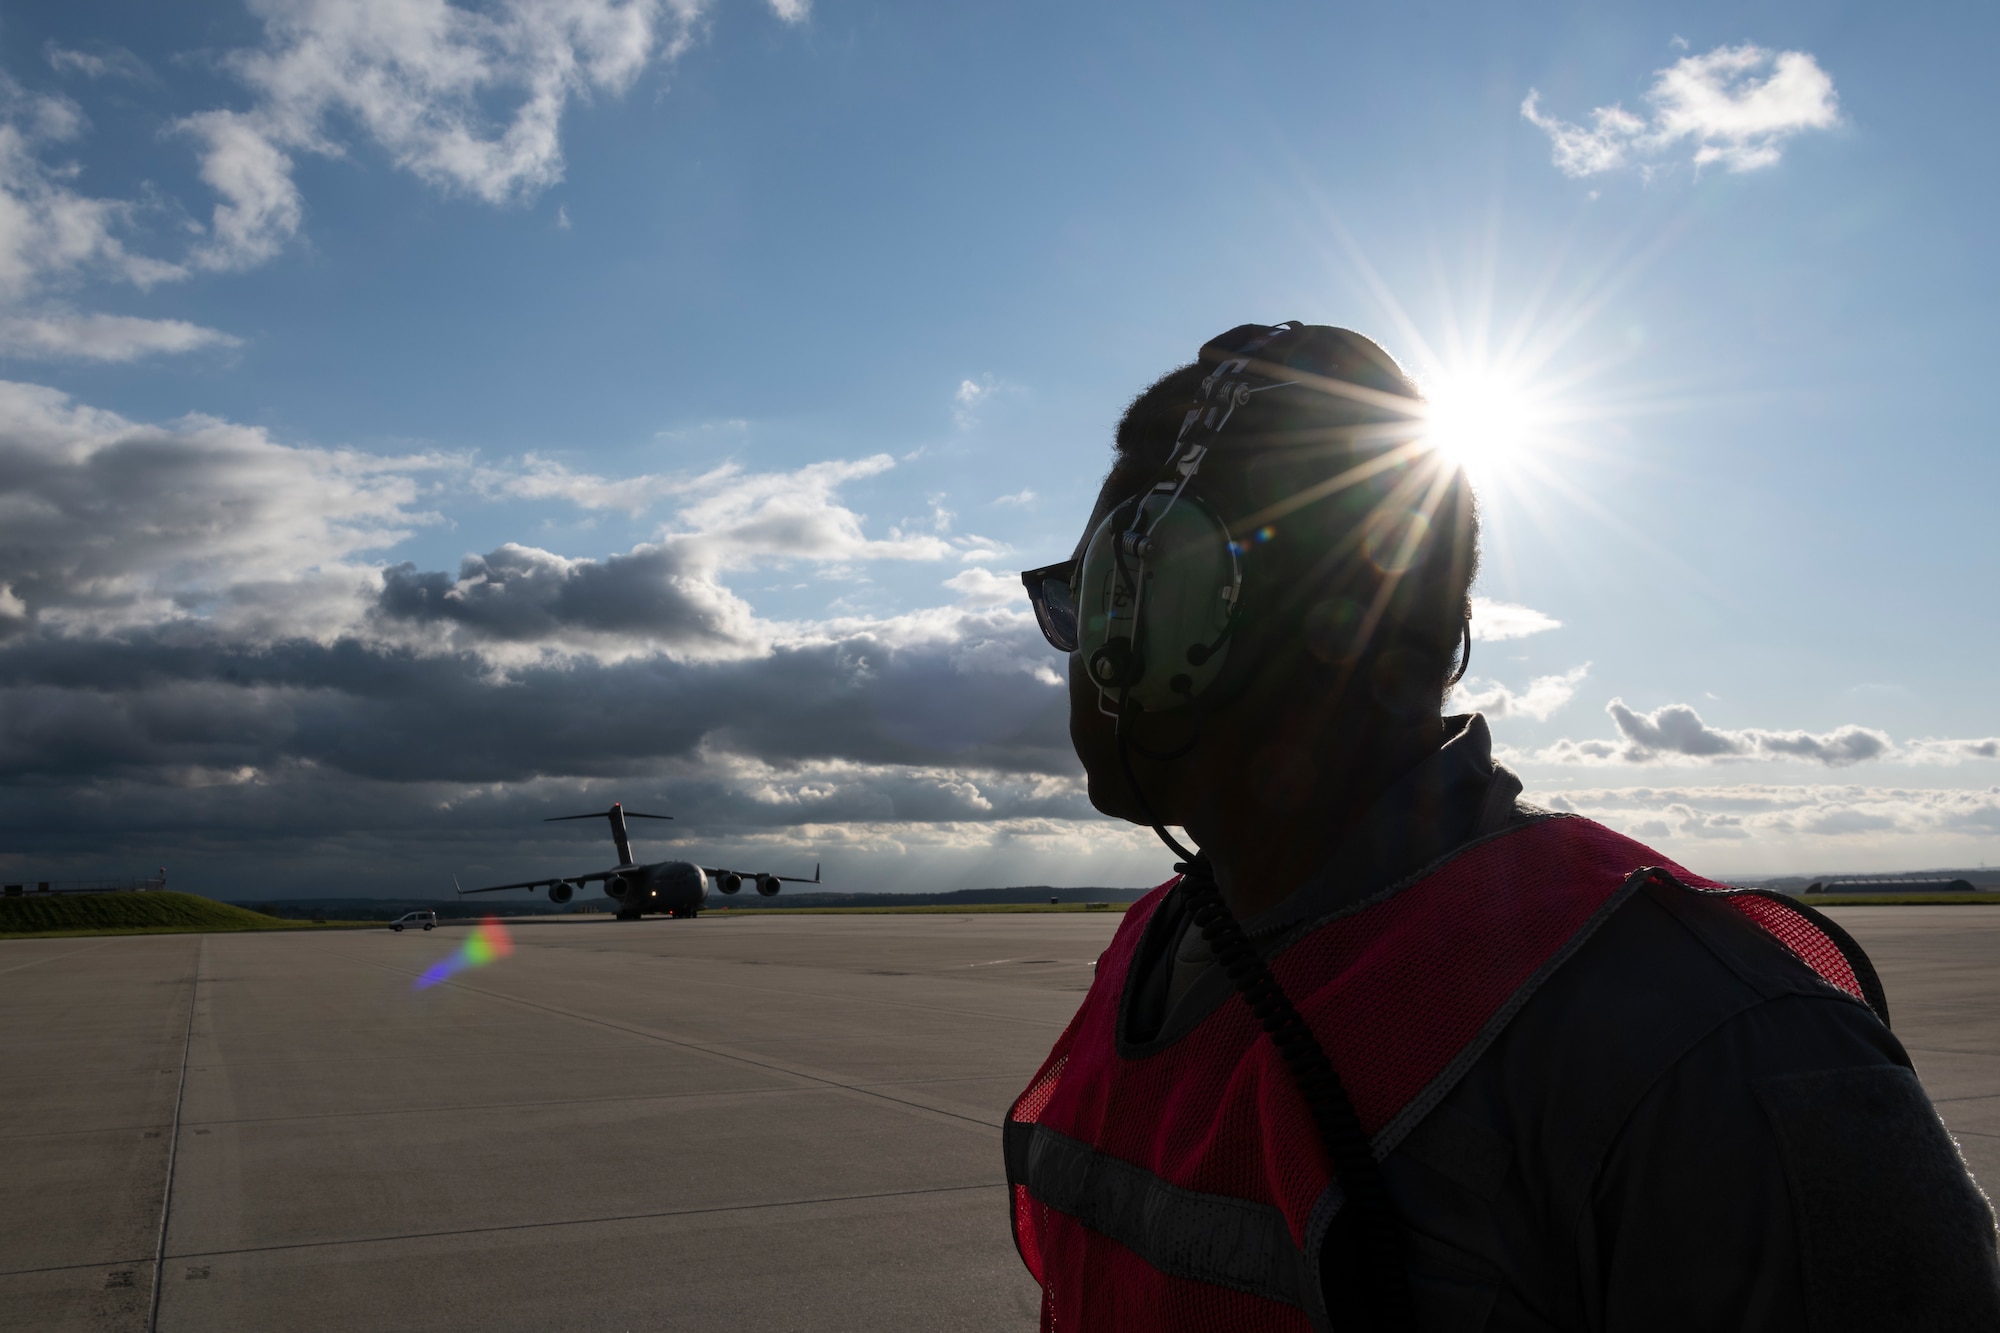 U.S. Air Force Senior Airman Leonard Bond, 726th Air Mobility Squadron aircraft electrical and environmental technician, waits to marshal a U.S. Air Force C-17 Globemaster III cargo aircraft assigned to Joint Base Charleston, South Carolina, after it landed on Spangdahlem Air Base, Germany, Aug. 27, 2021.